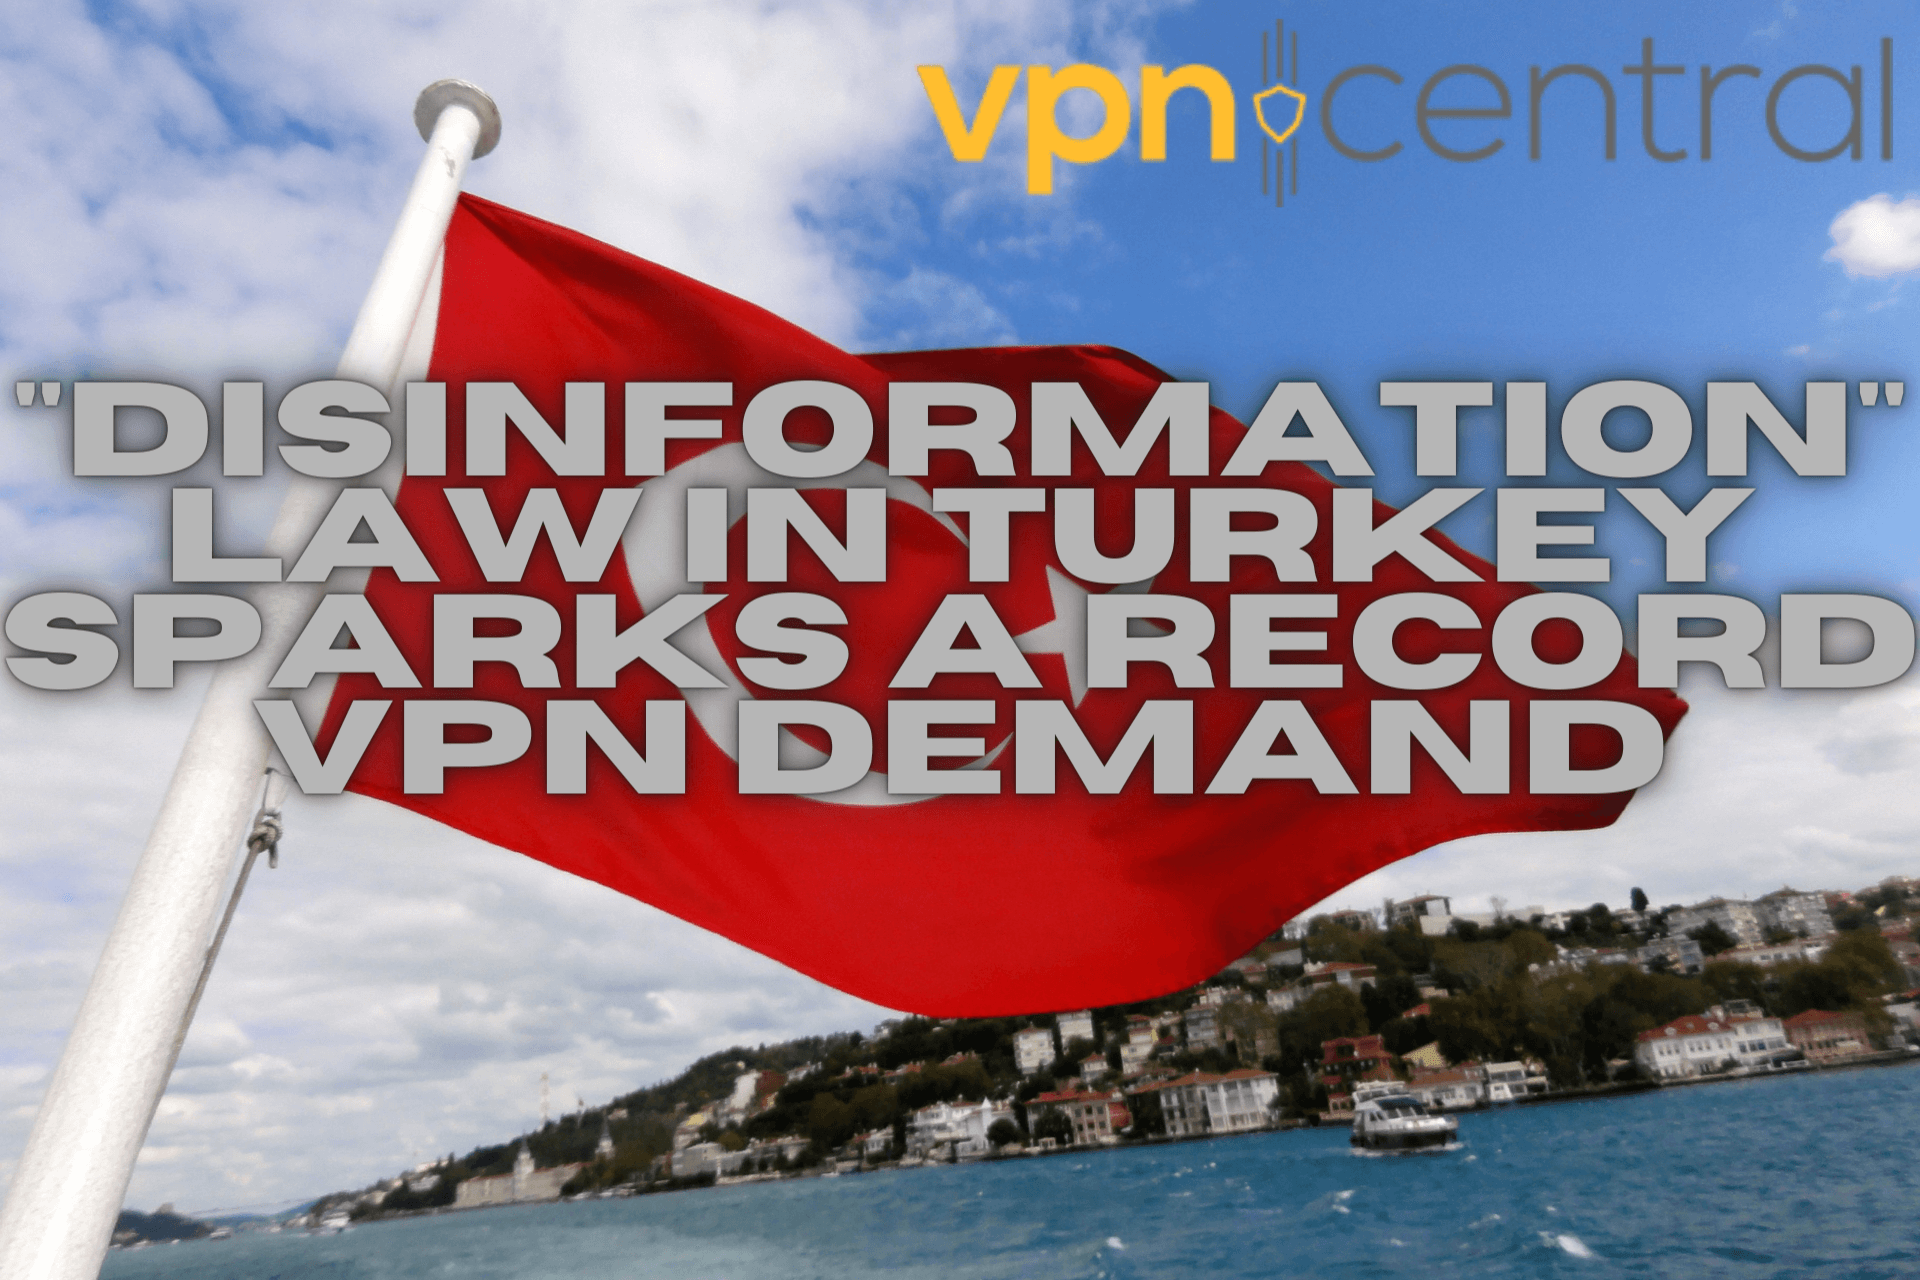 Disinformation Law in Turkey Sparks a Record VPN Demand